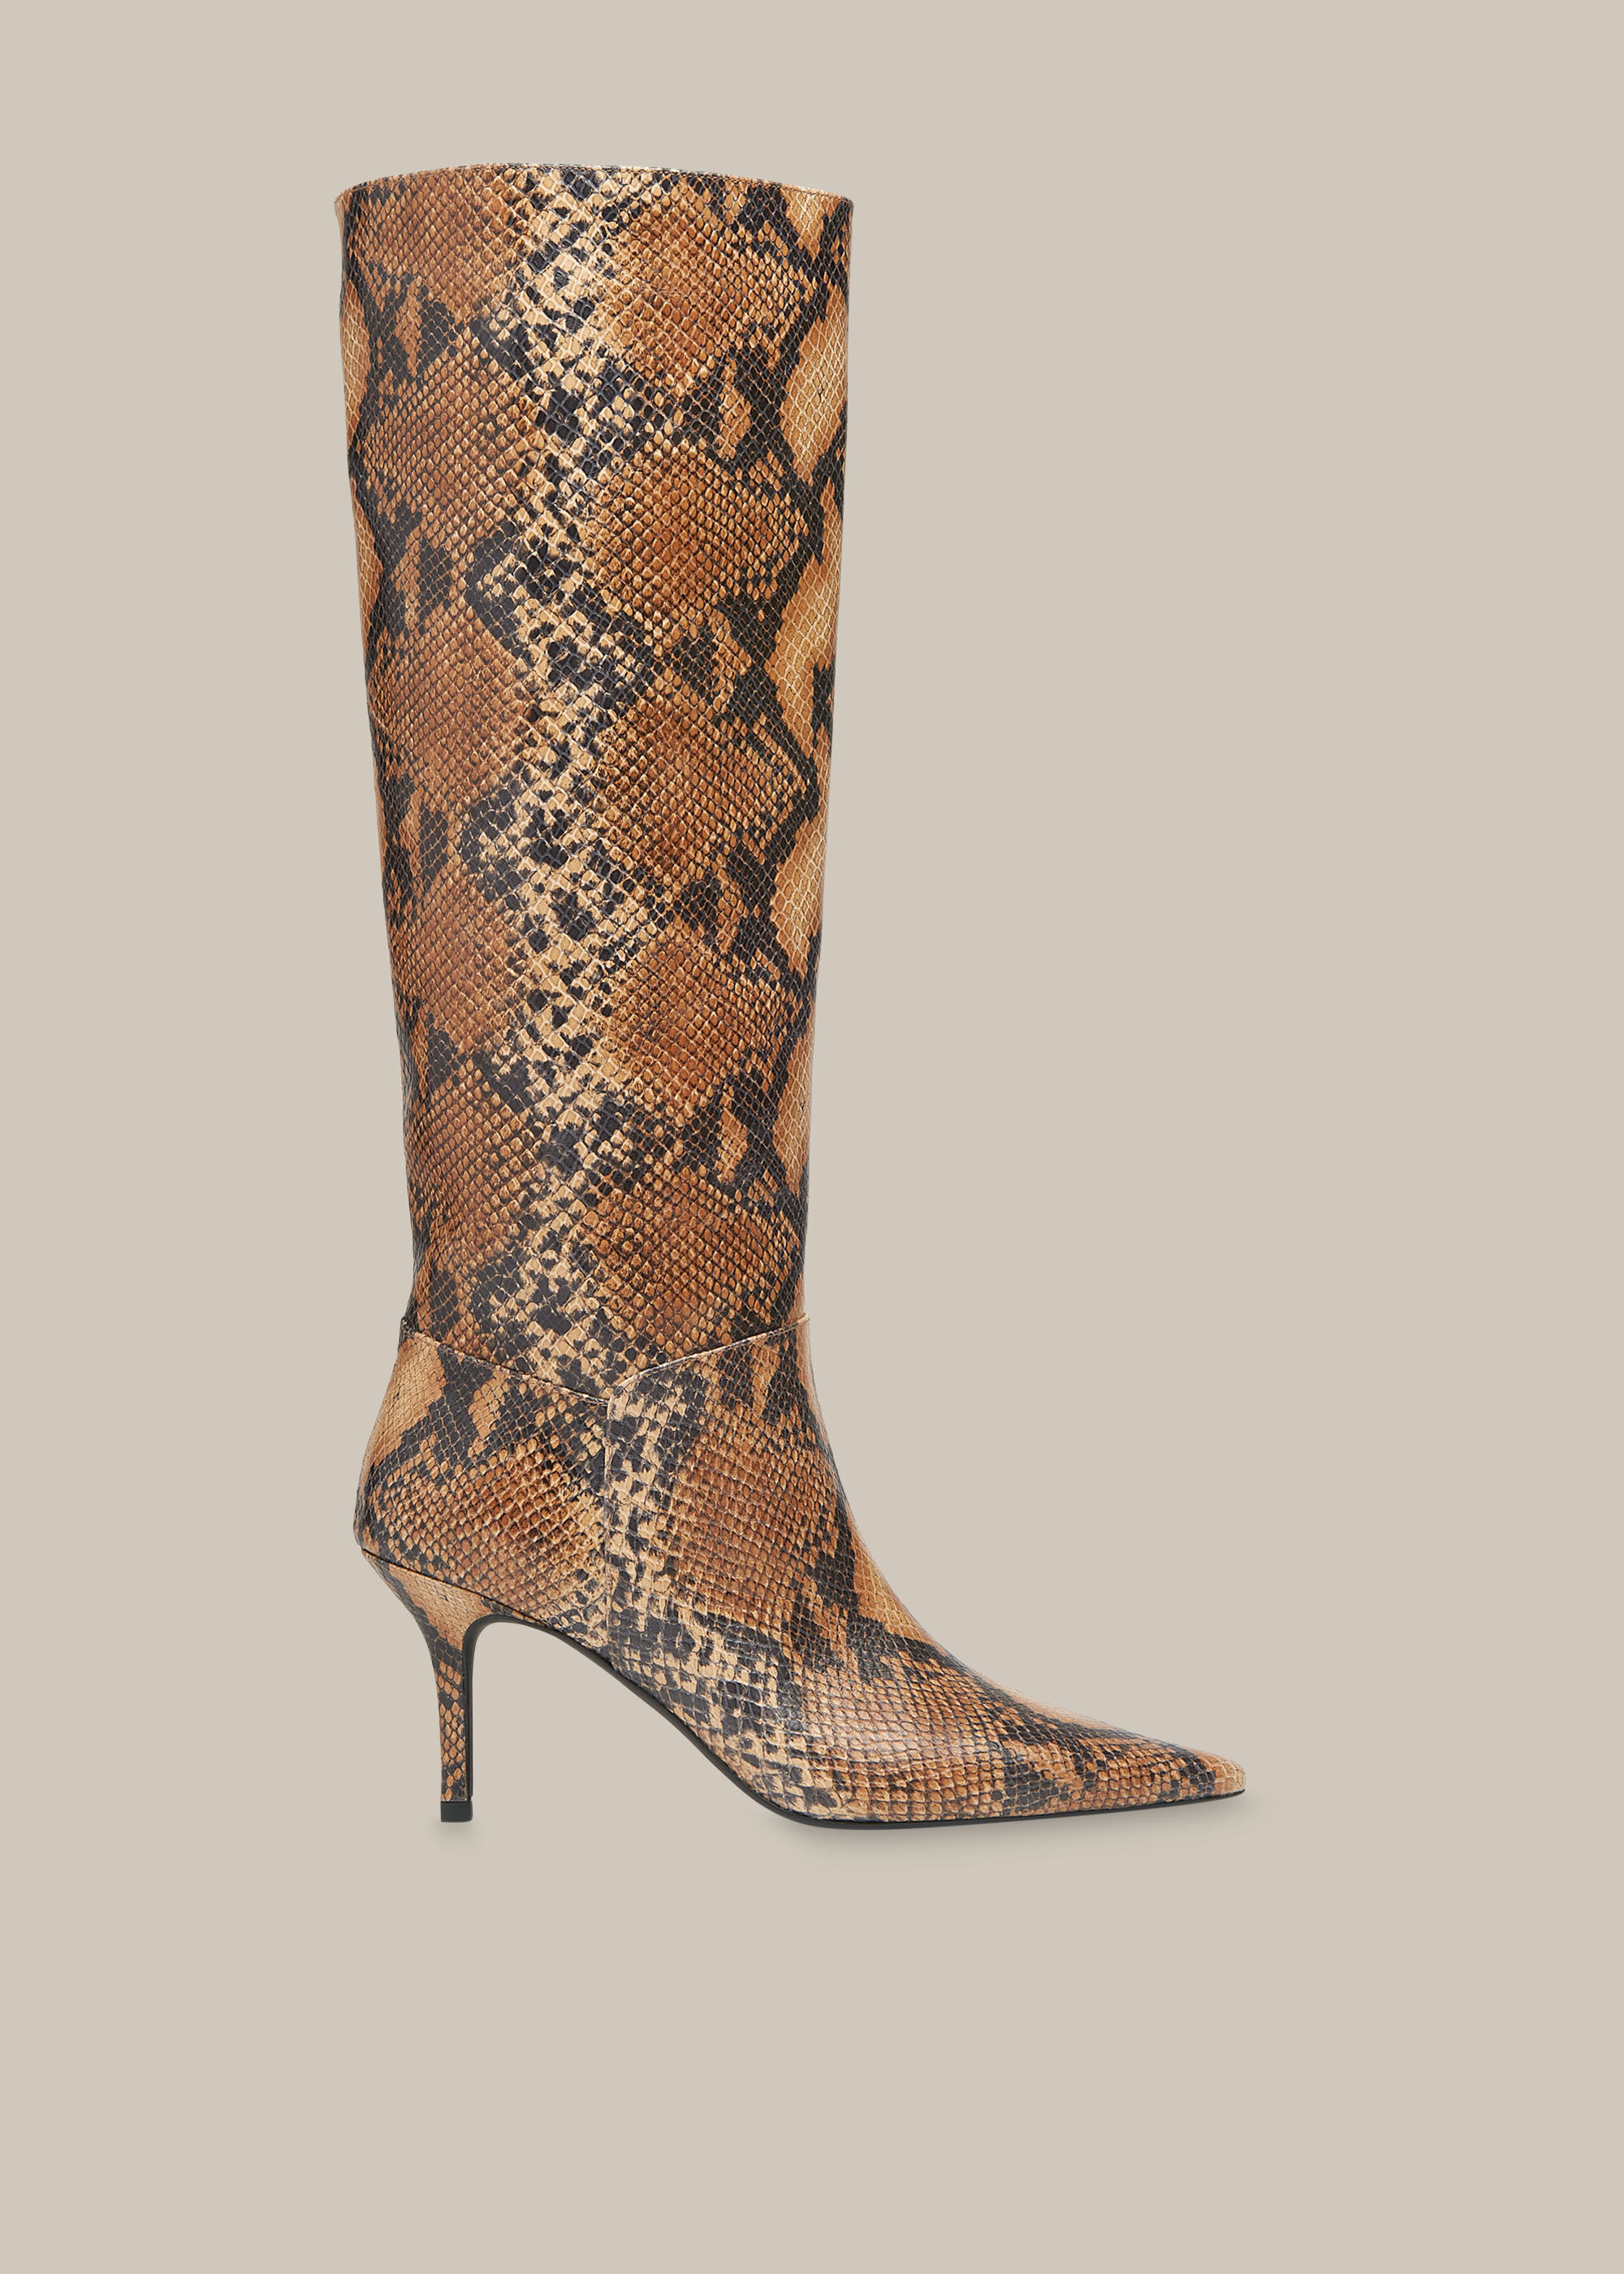 Brown/Multi Conna Snake Knee High Boot 